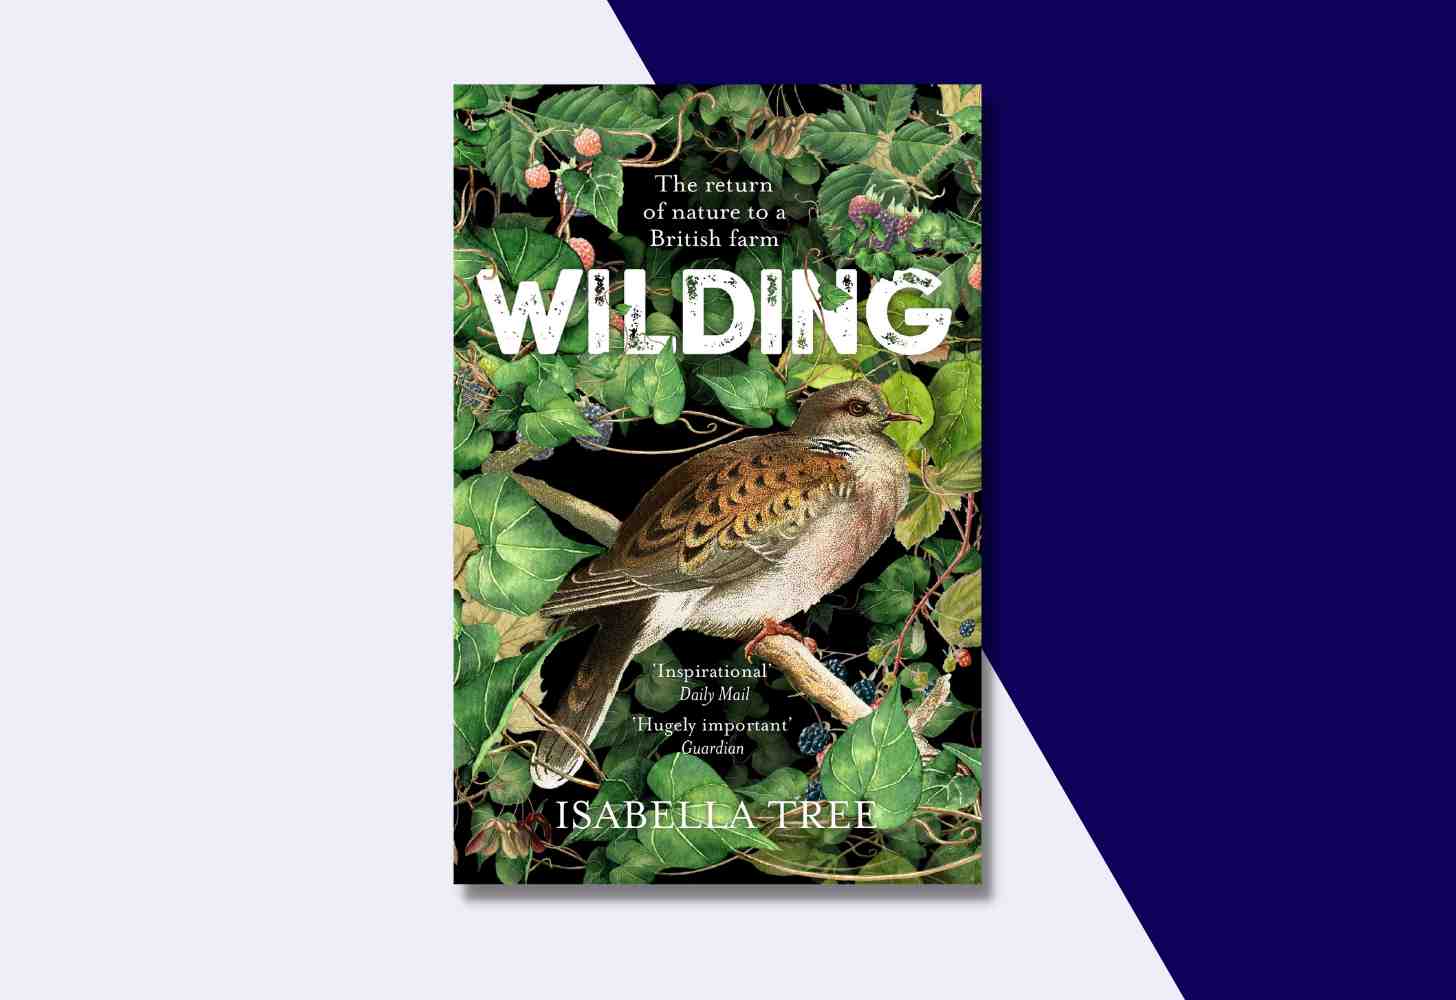 The Cover Of “Wilding: The Return of Nature to a British Farm” by Isabella Tree